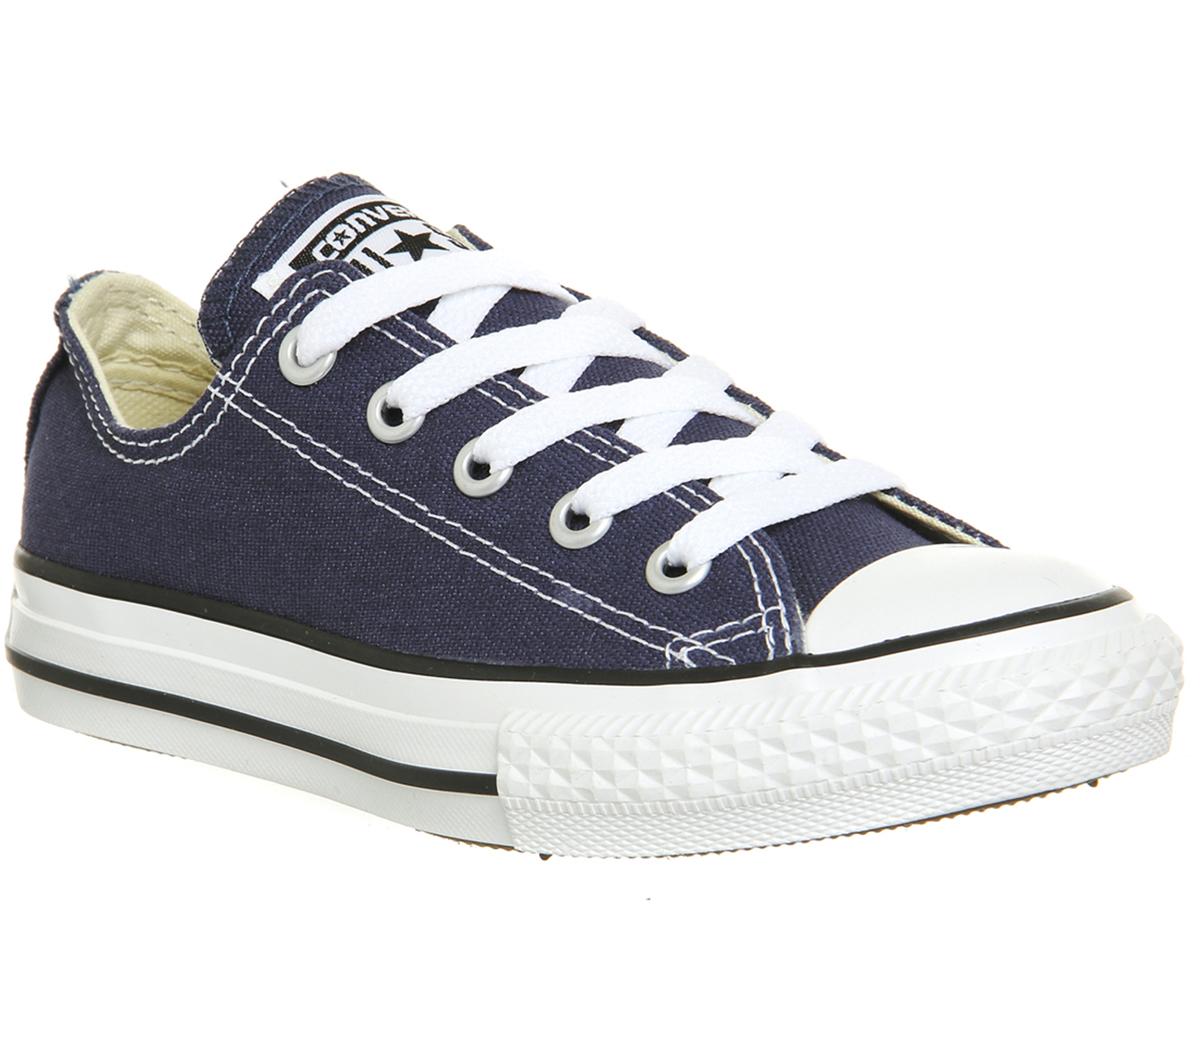 Converse All Star Low Youth Navy - Unisex